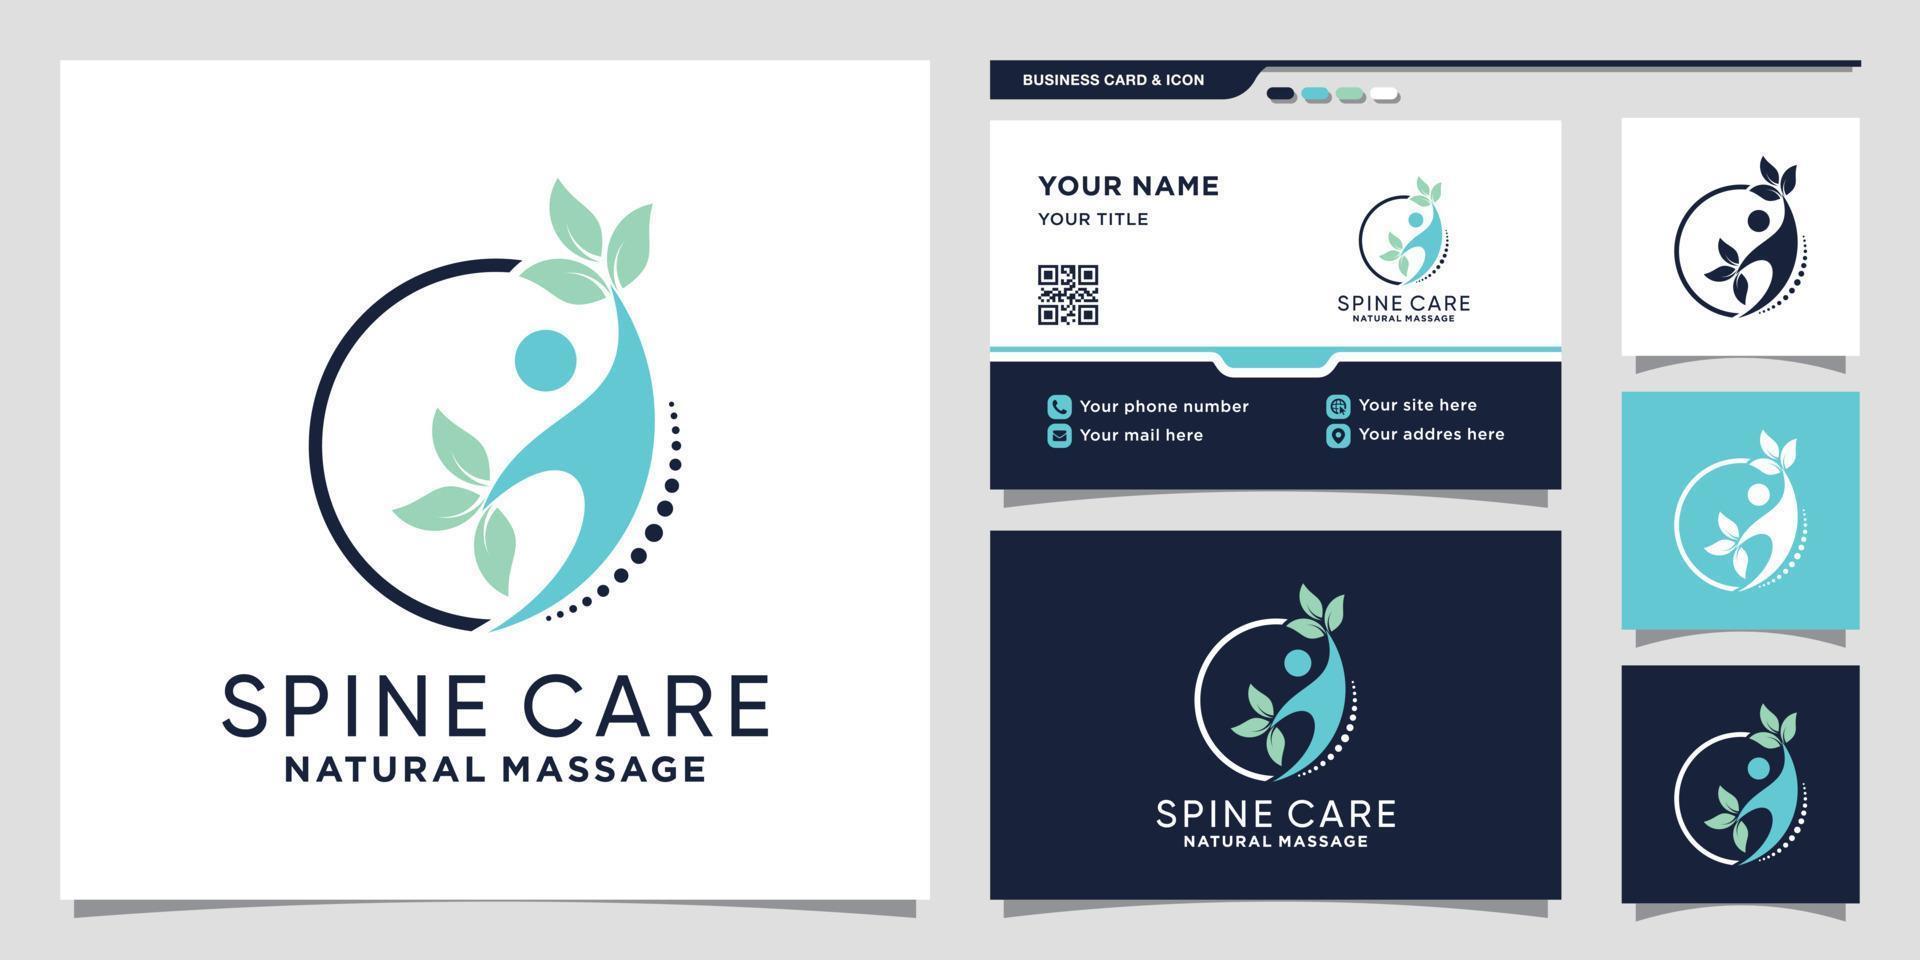 Spine care logo with circle concept and business card design Premium Vector